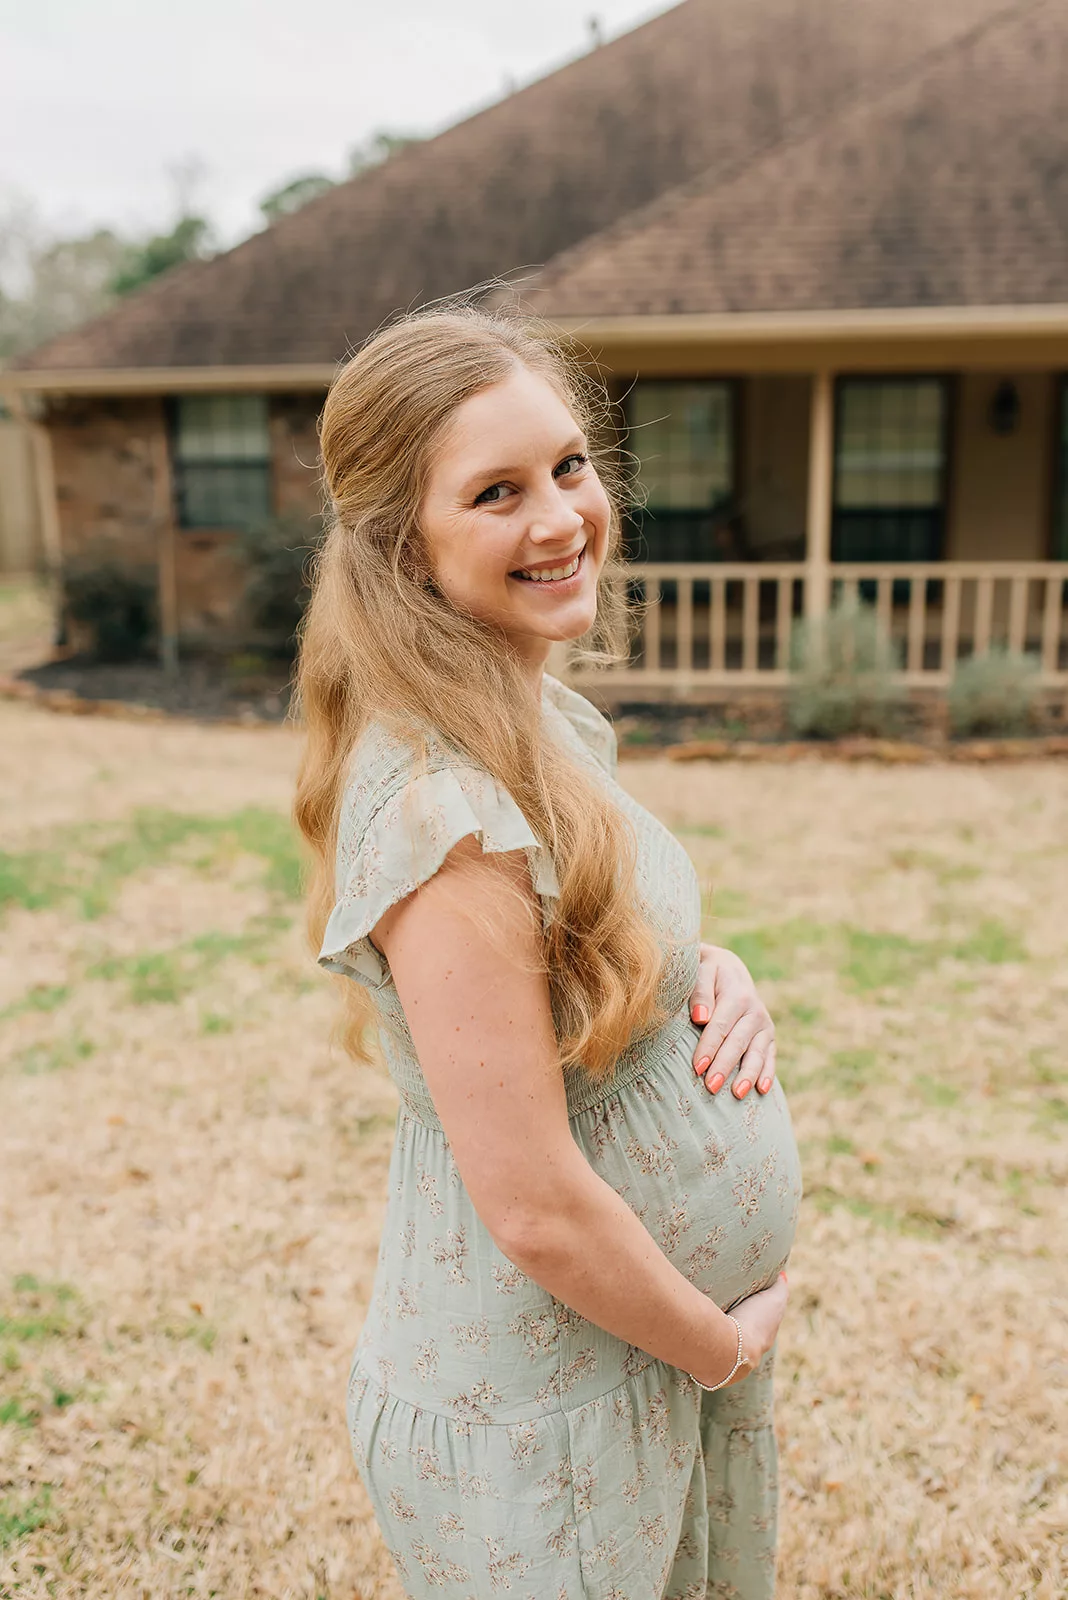 A happy mom to be in a green maternity dress stands smiling over her shoulder in front of a house after meeting a Houston OBGYNs